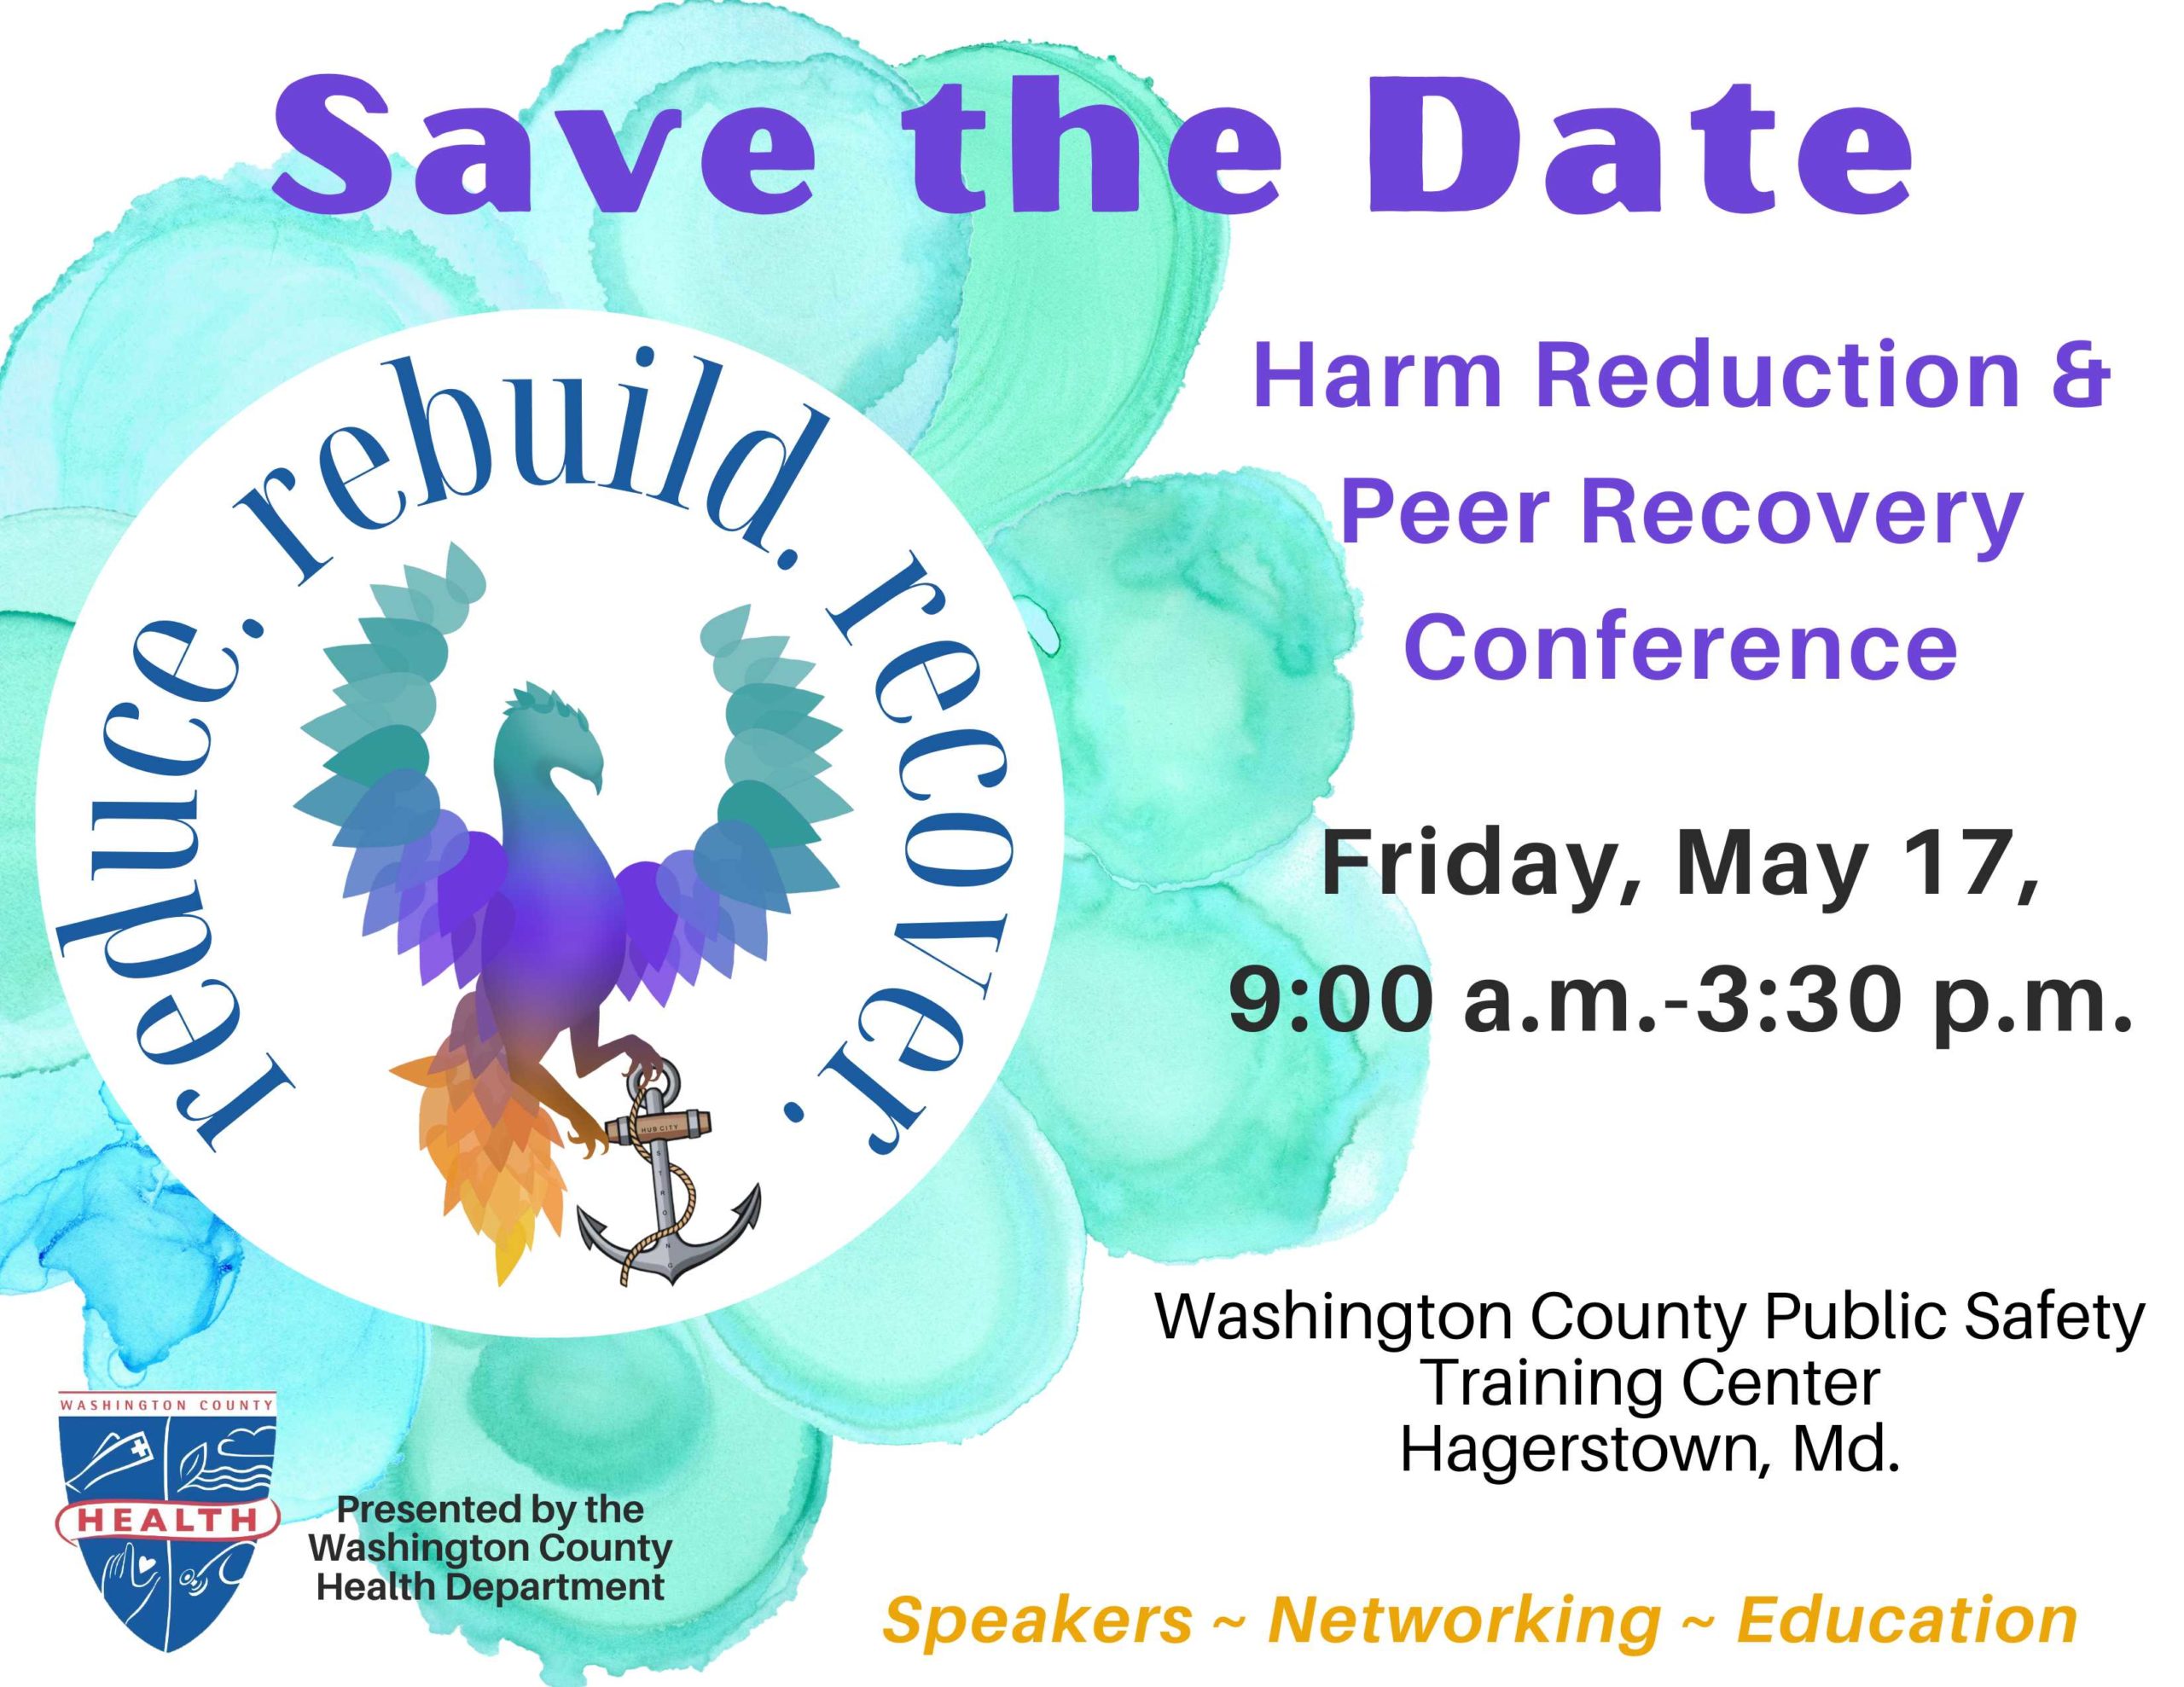 Image: Illustration of flower with teal petals and center of a colorful bird holding an anchor surrounded by the words "reduce. rebuild. recover." Text: Harm Reduction & Peer Recovery Conference, Friday, May 17, 9 a.m.-4 p.m., Washington County Public Safety Center, Hagerstown.